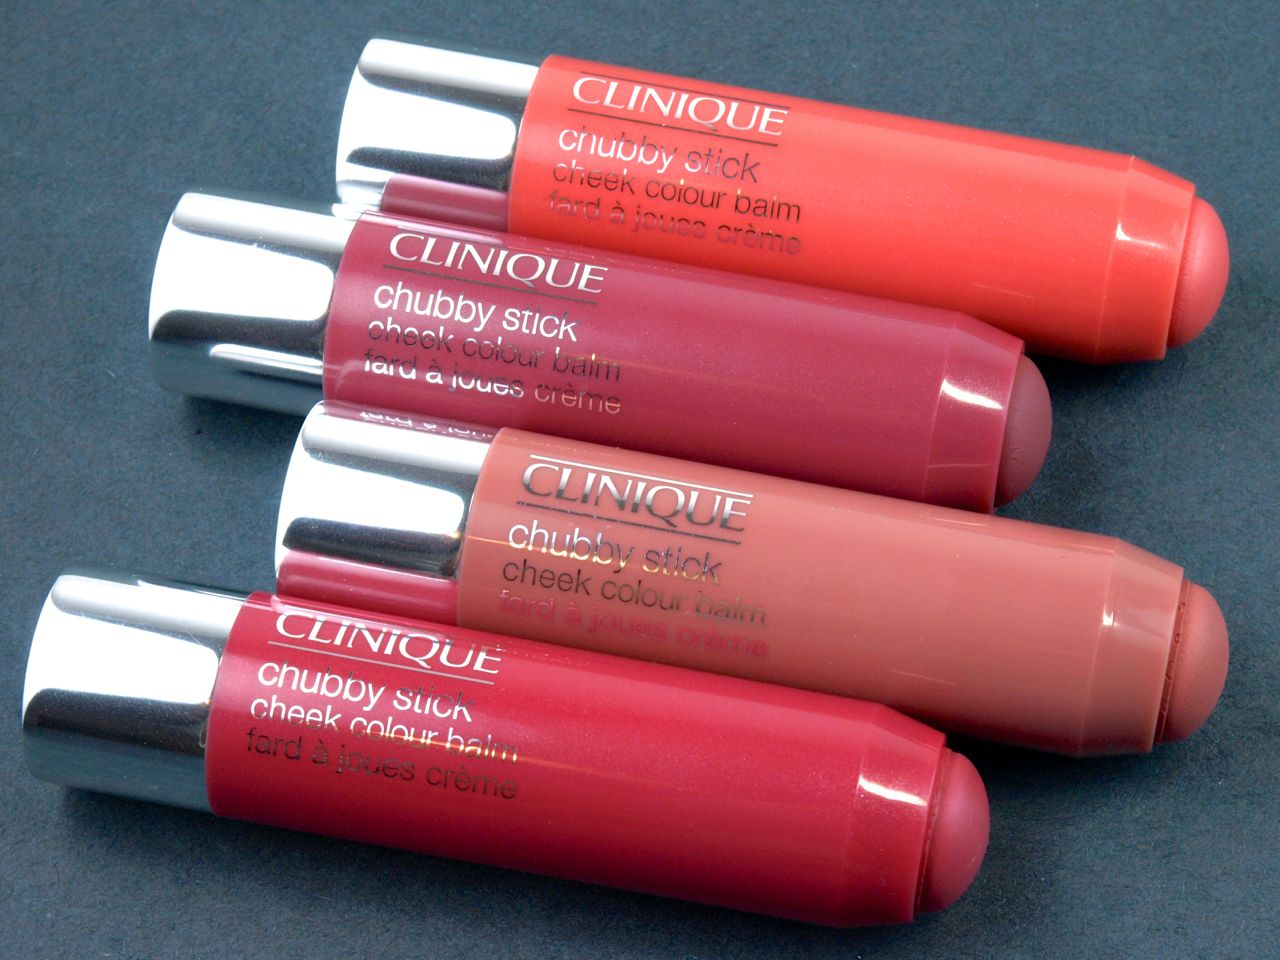 Clinique Chubby Stick Cheek Color Balm: Review and Swatches